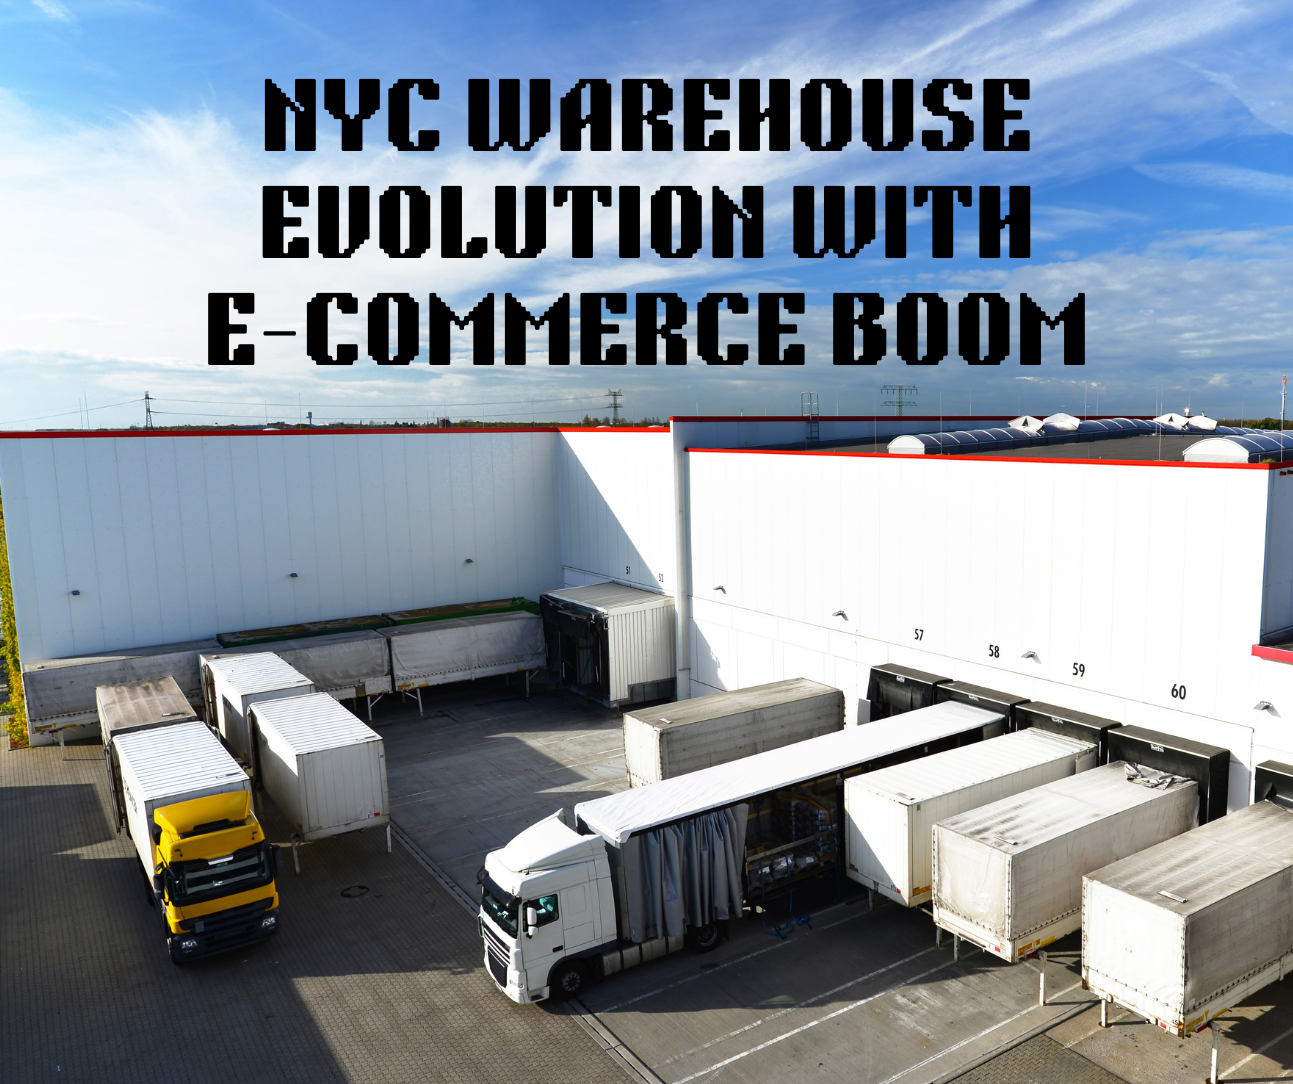 New York City Warehouse Evolution with E-Commerce Boom